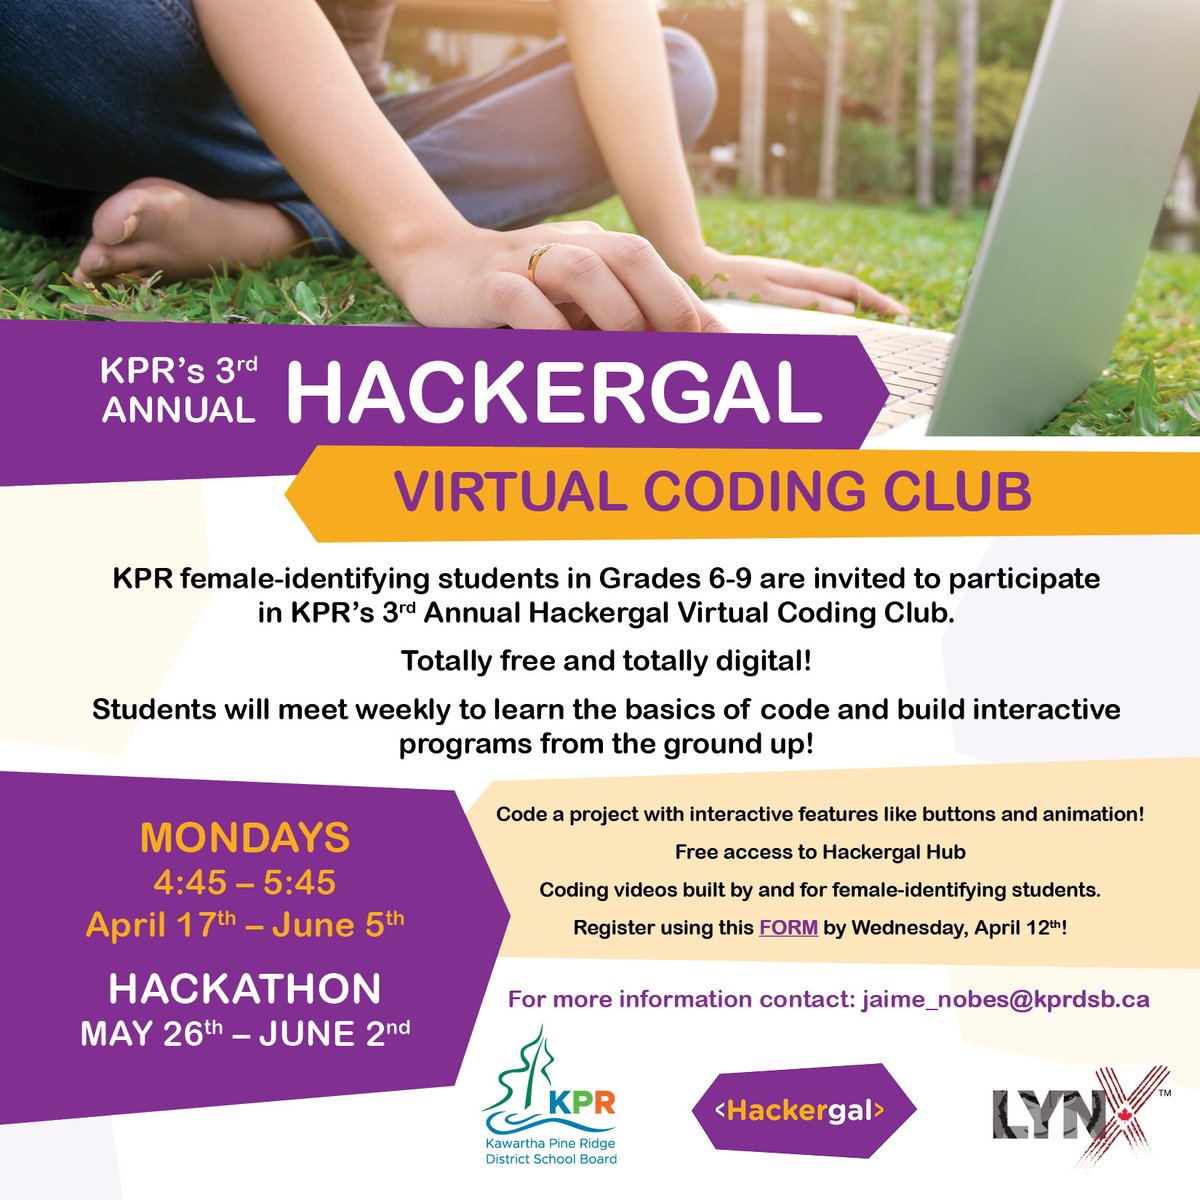 Female-identifying students in Grades 6 to 9 are invited to learn text-based code in a free virtual coding club hosted by KPR & @thehackergals! After school sessions will be held weekly on Mondays from 4:45 - 5:45 pm. Register online before April 12th bit.ly/3Kt1W1l